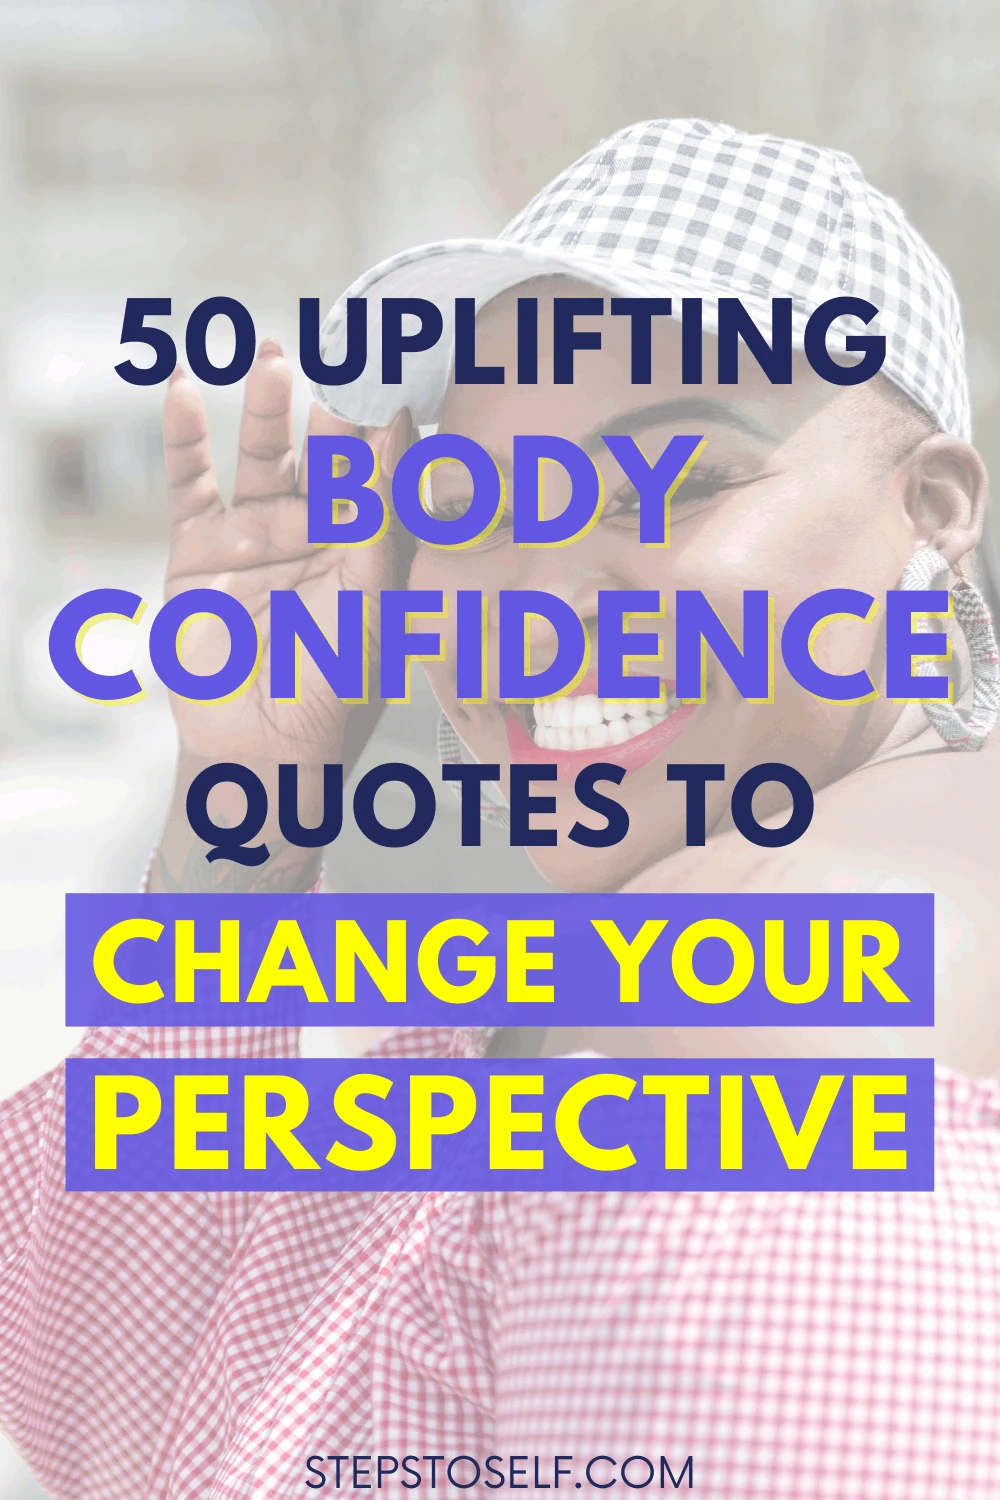 Rethink Your Body Image with These Love Your Body Quotes